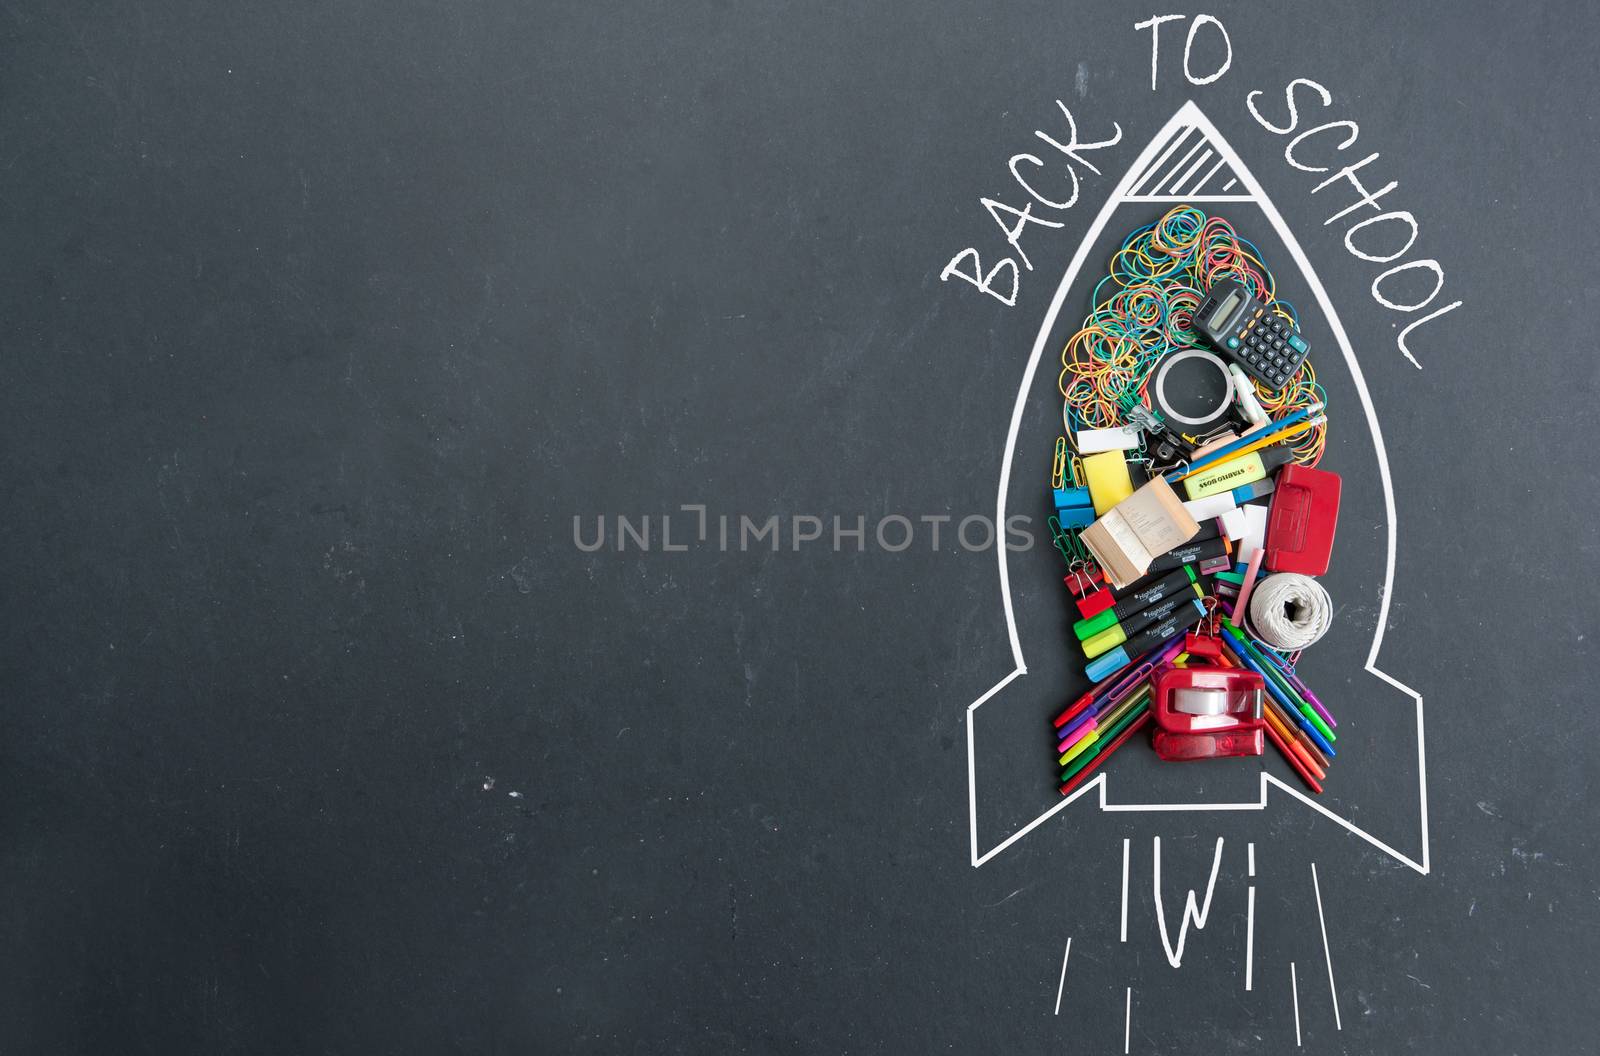 Back to school sketch of a rocket icon with stationery accessories on a chalkboard